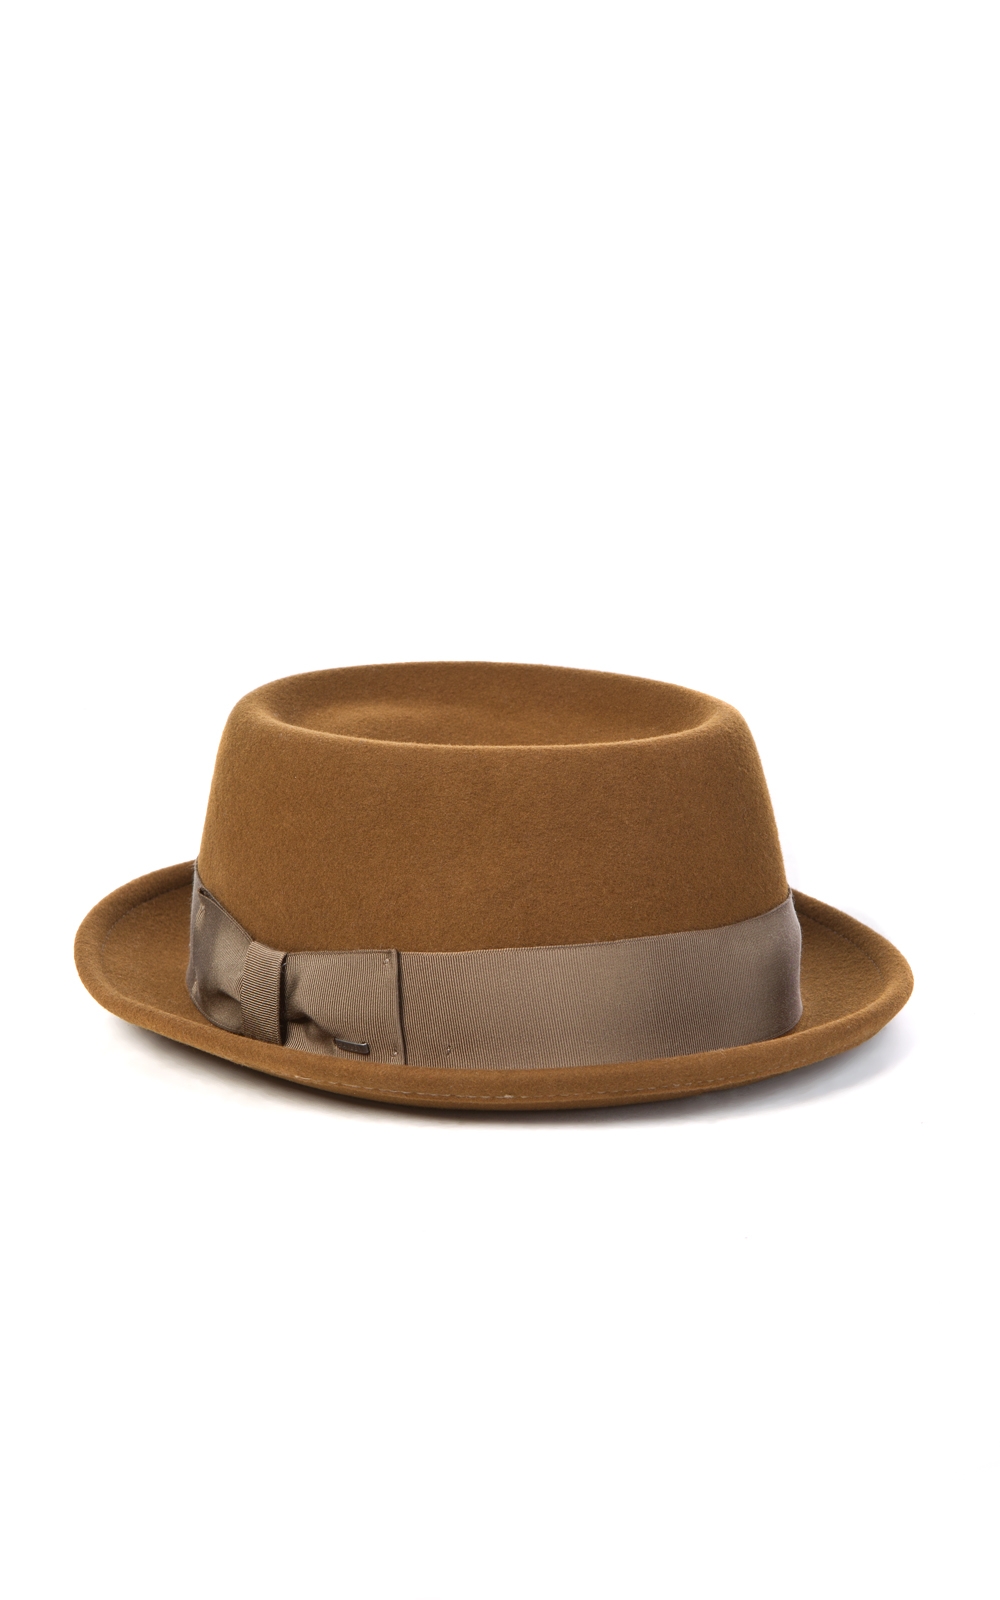 City Hunter Pmt111 Cotton Plain Roll-Up With Self Band Fedora 